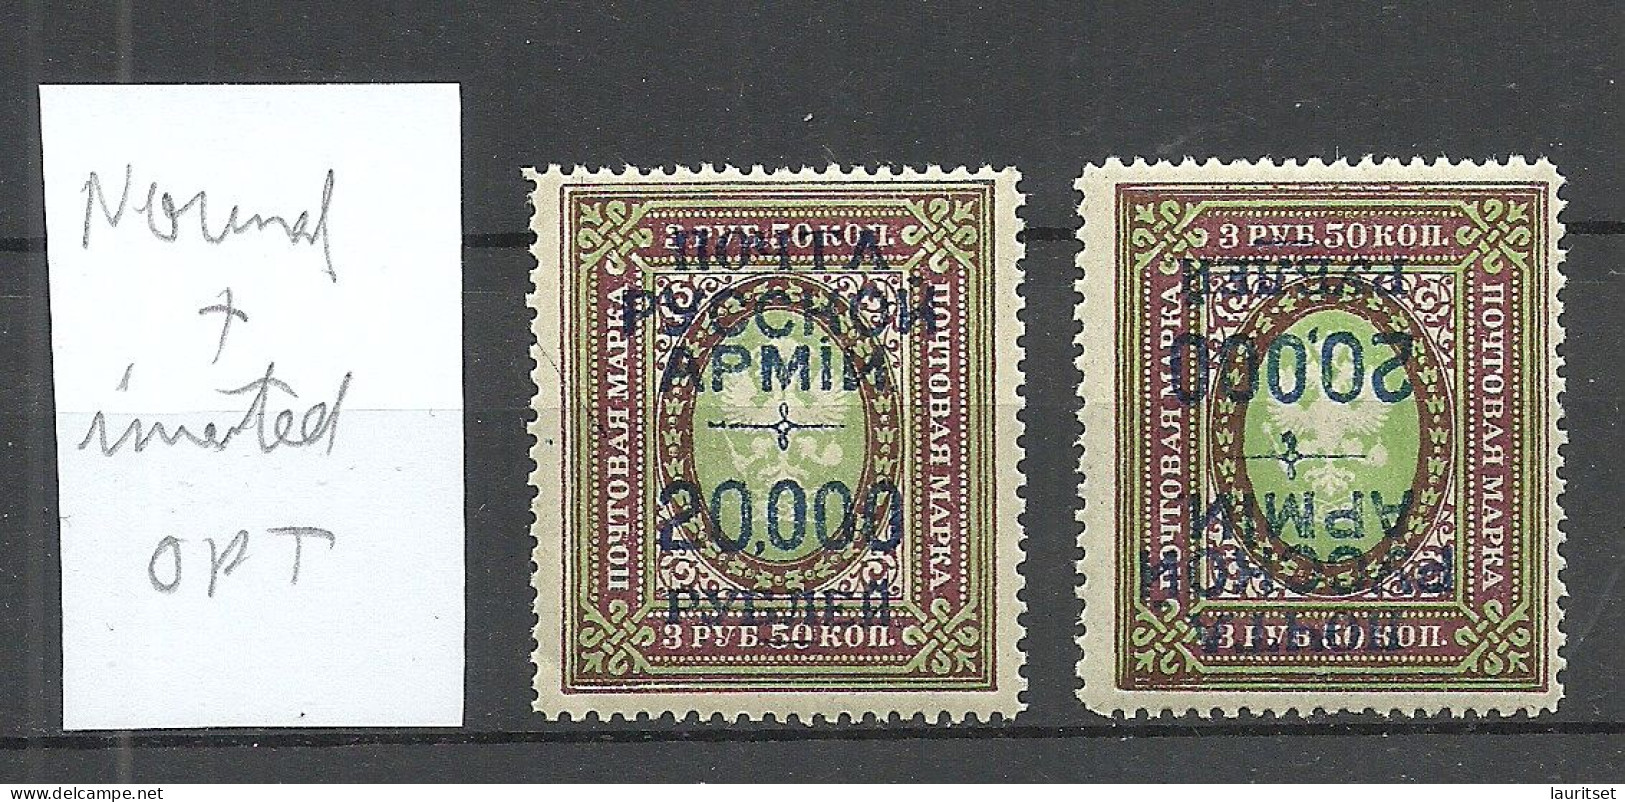 Russia RUSSLAND 1920 Civil War Wrangel Army Camp Post At Gallipoli 20 000 On 3,50 R. Perforated, Normal + INVERTED OPT * - Armada Wrangel